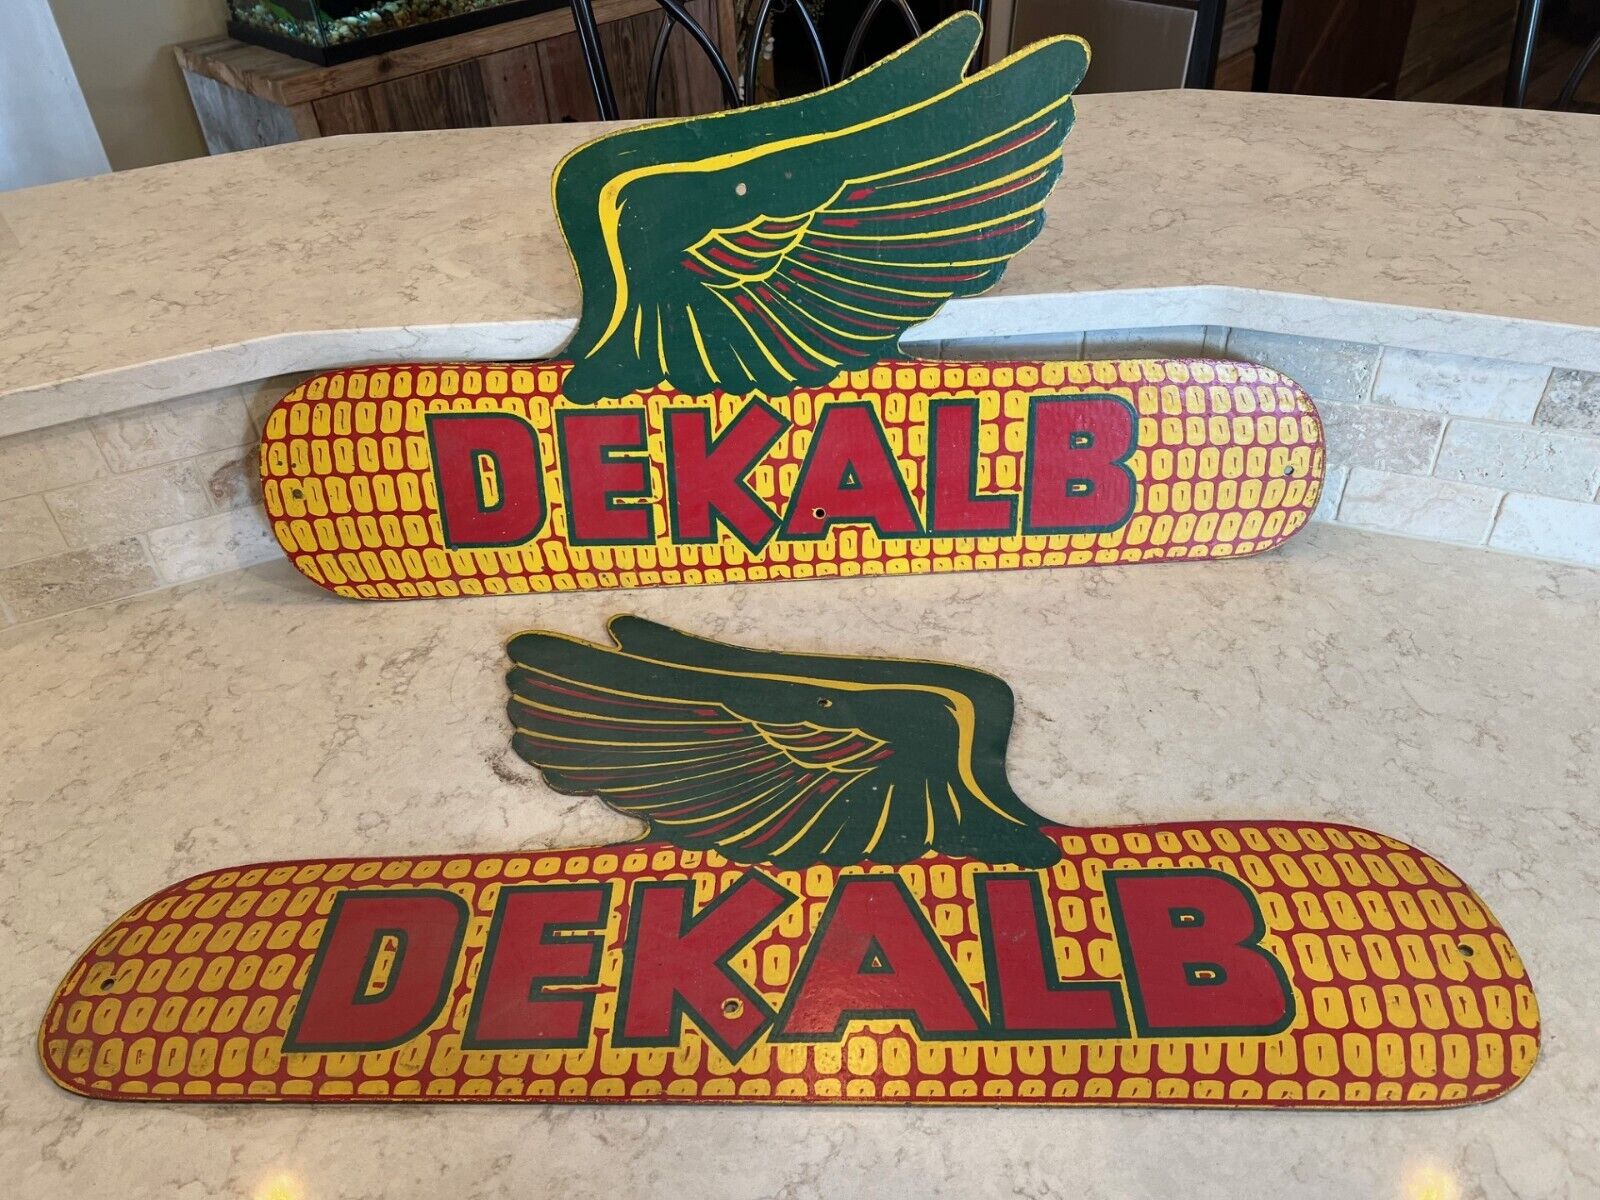 Vintage Original Masonite Dekalb Seed signs includes both right and left facing 